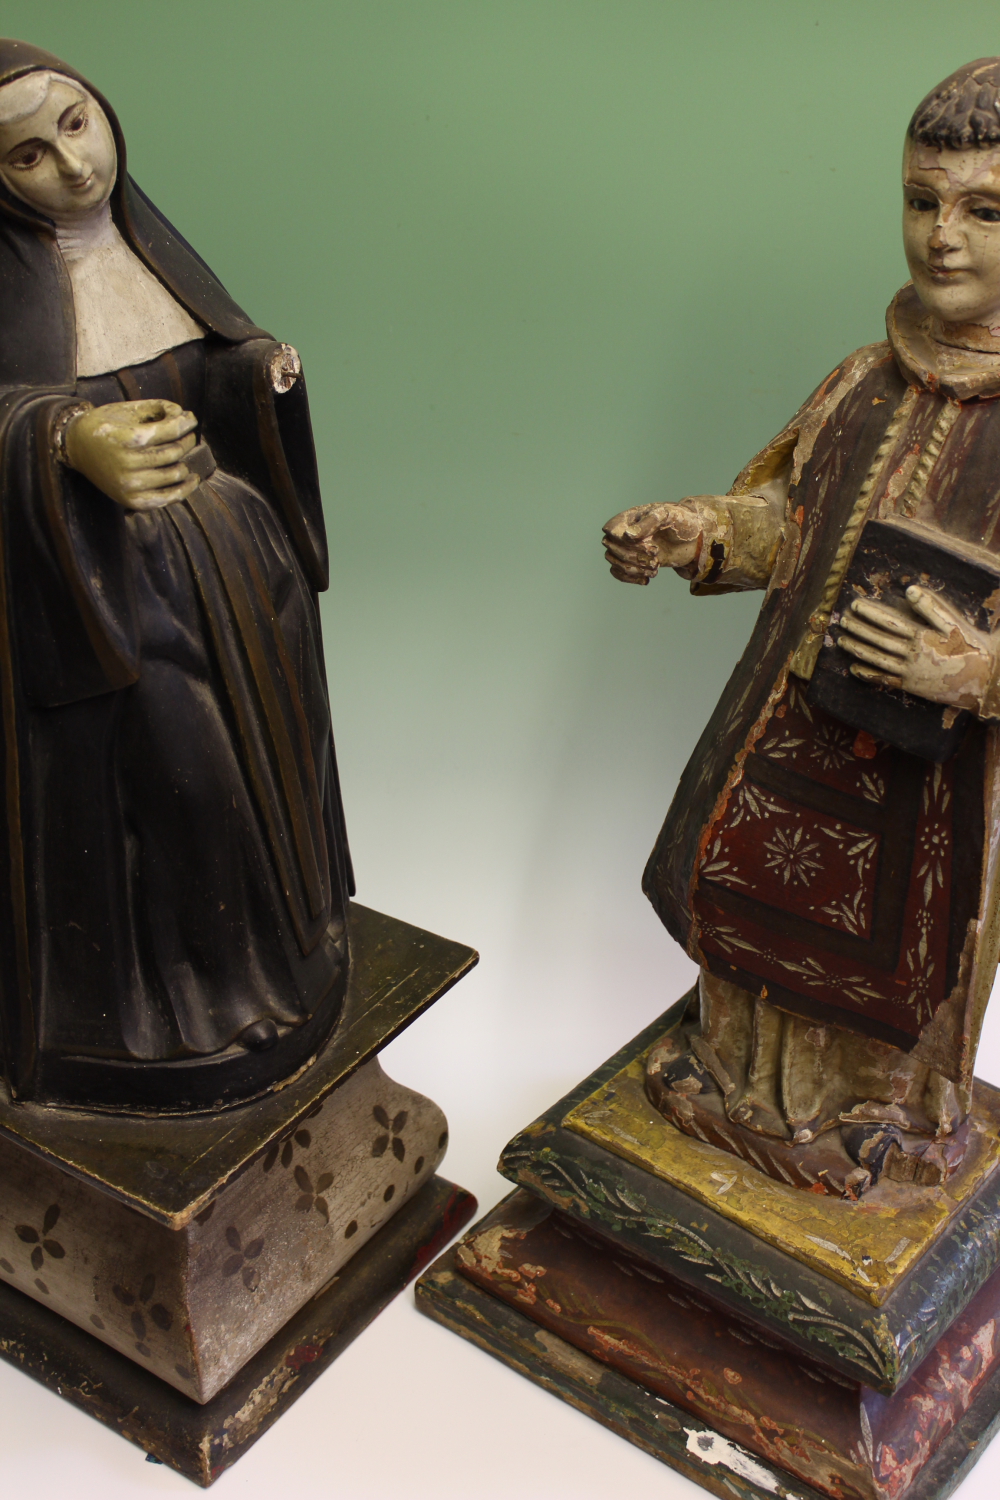 Two early Spanish painted and carved wood figures of a nun and a saint, she in black and white robes